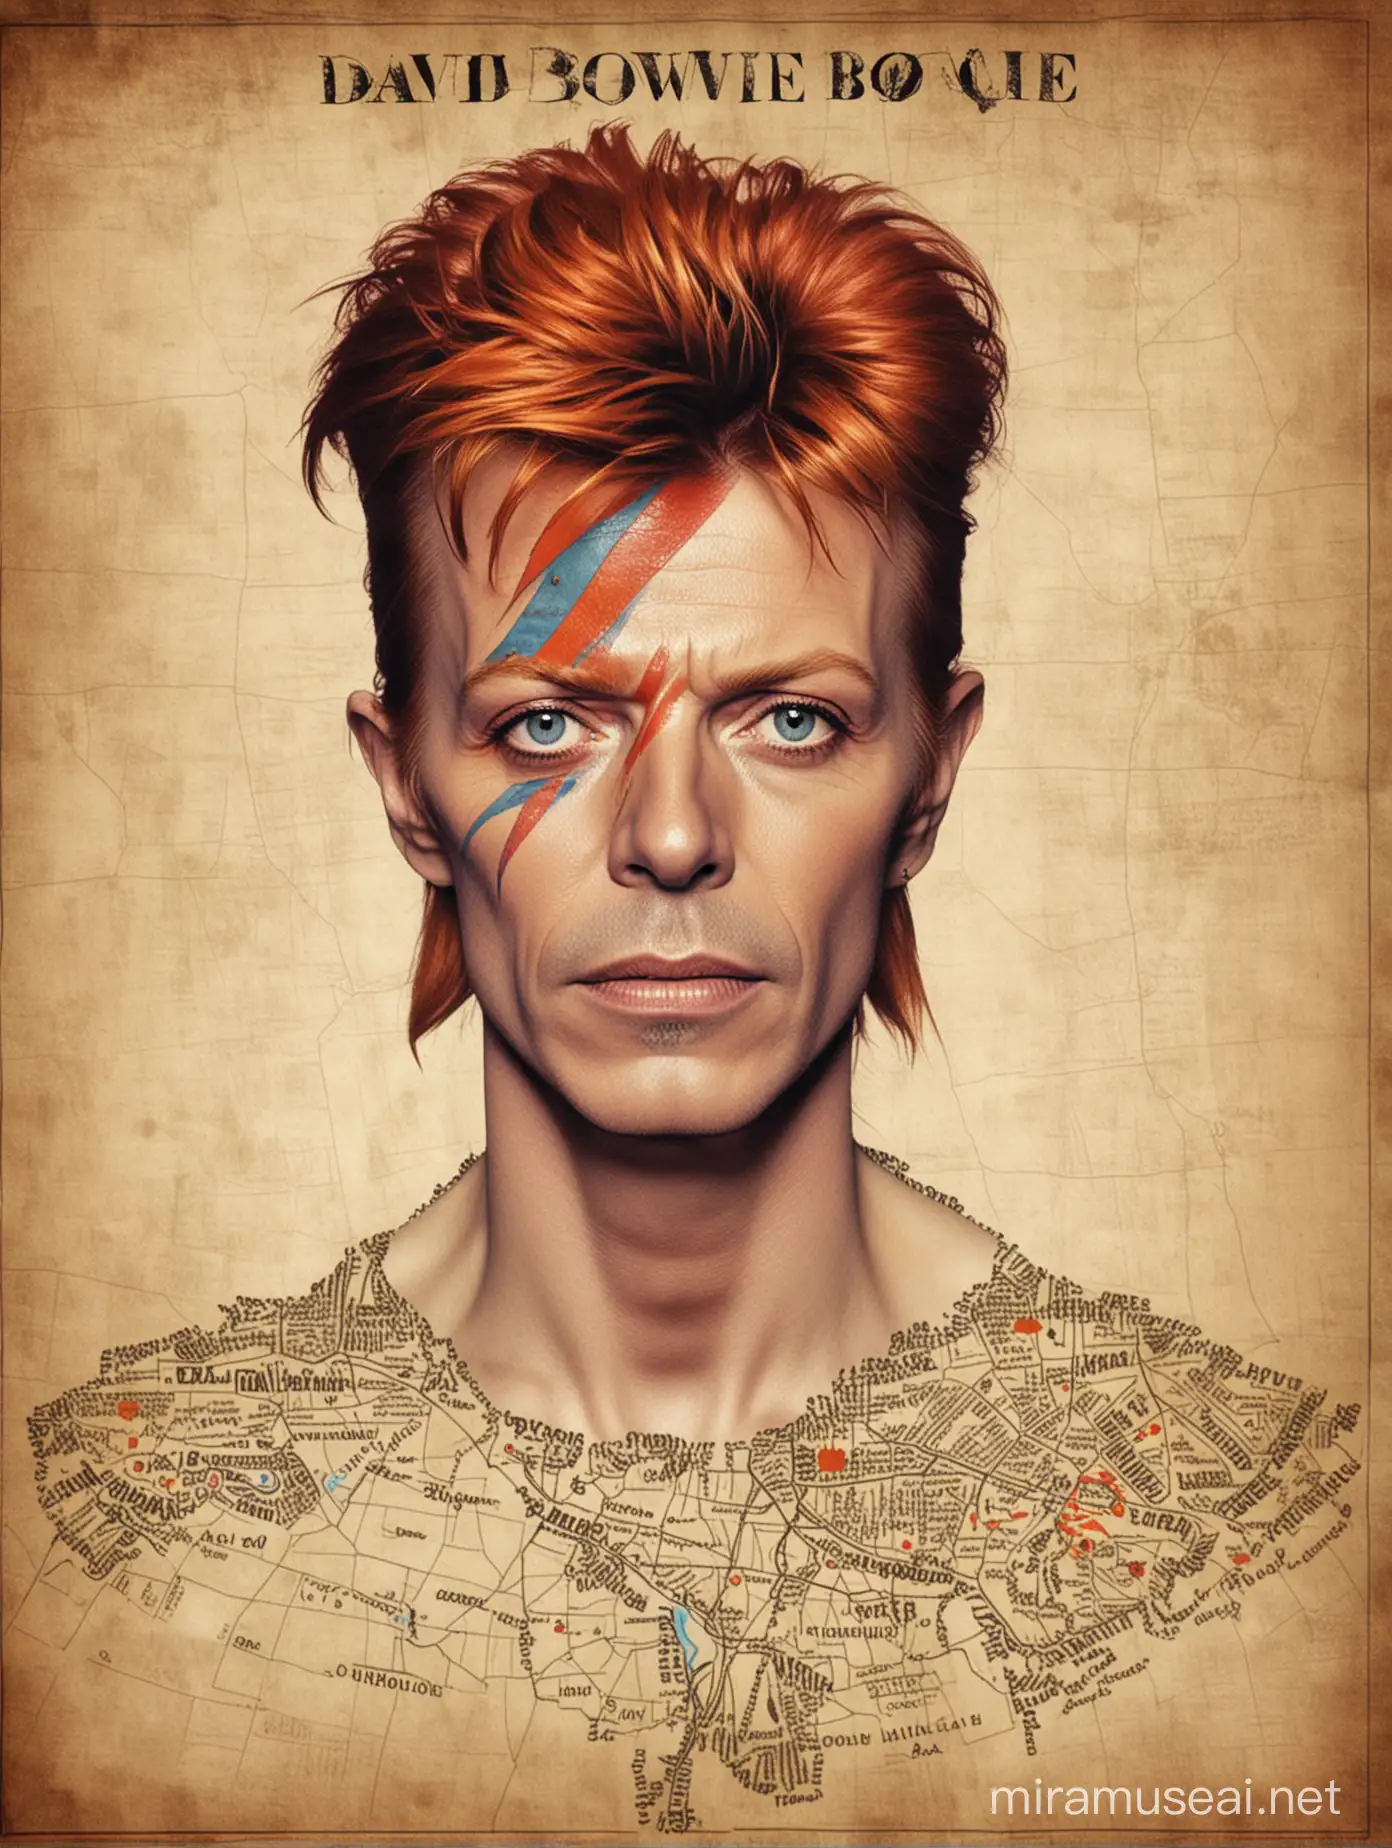 David Bowie Inspired World Map Art Cosmic Cartography Featuring Iconic Symbols and Imagery